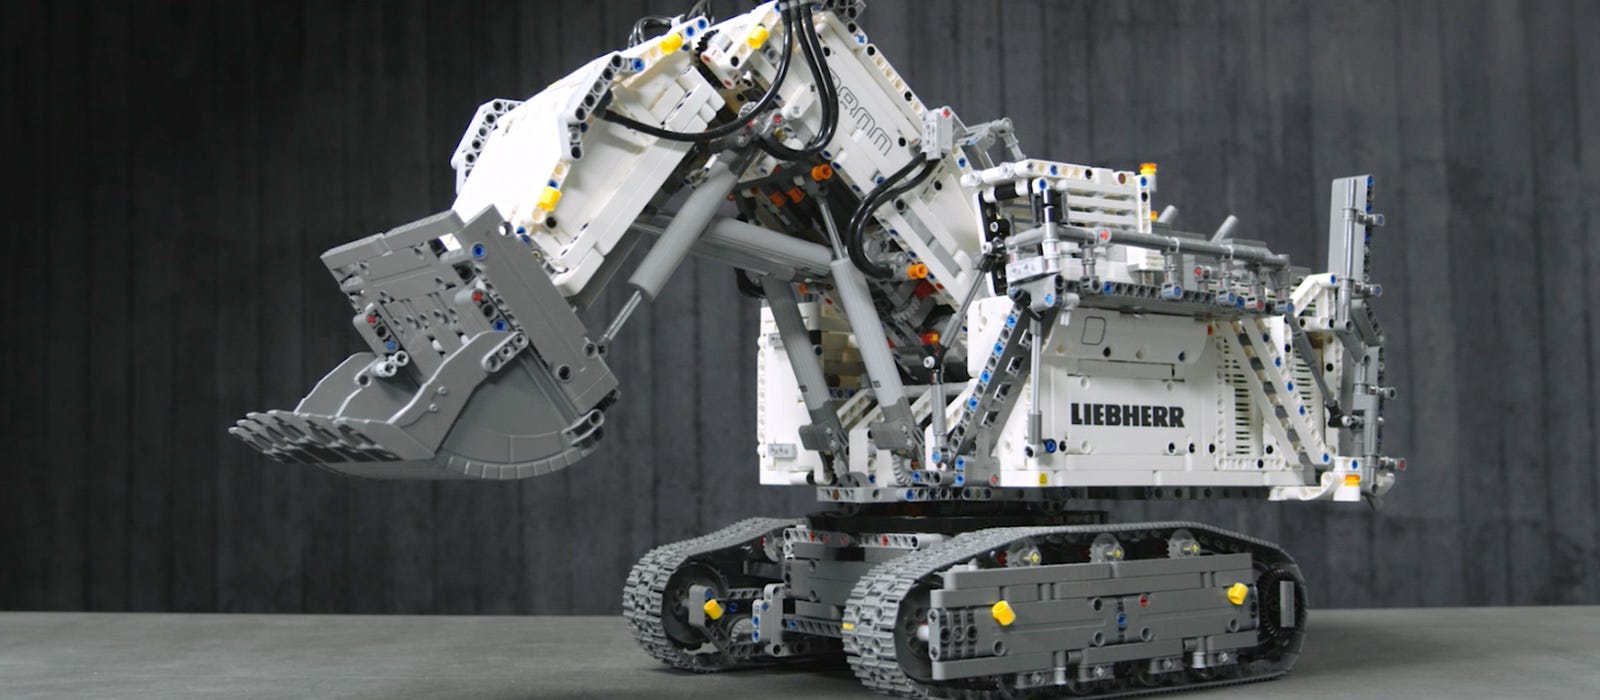 Discover the Awesome RemoteControlled Liebherr R 9800 Excavator LEGO